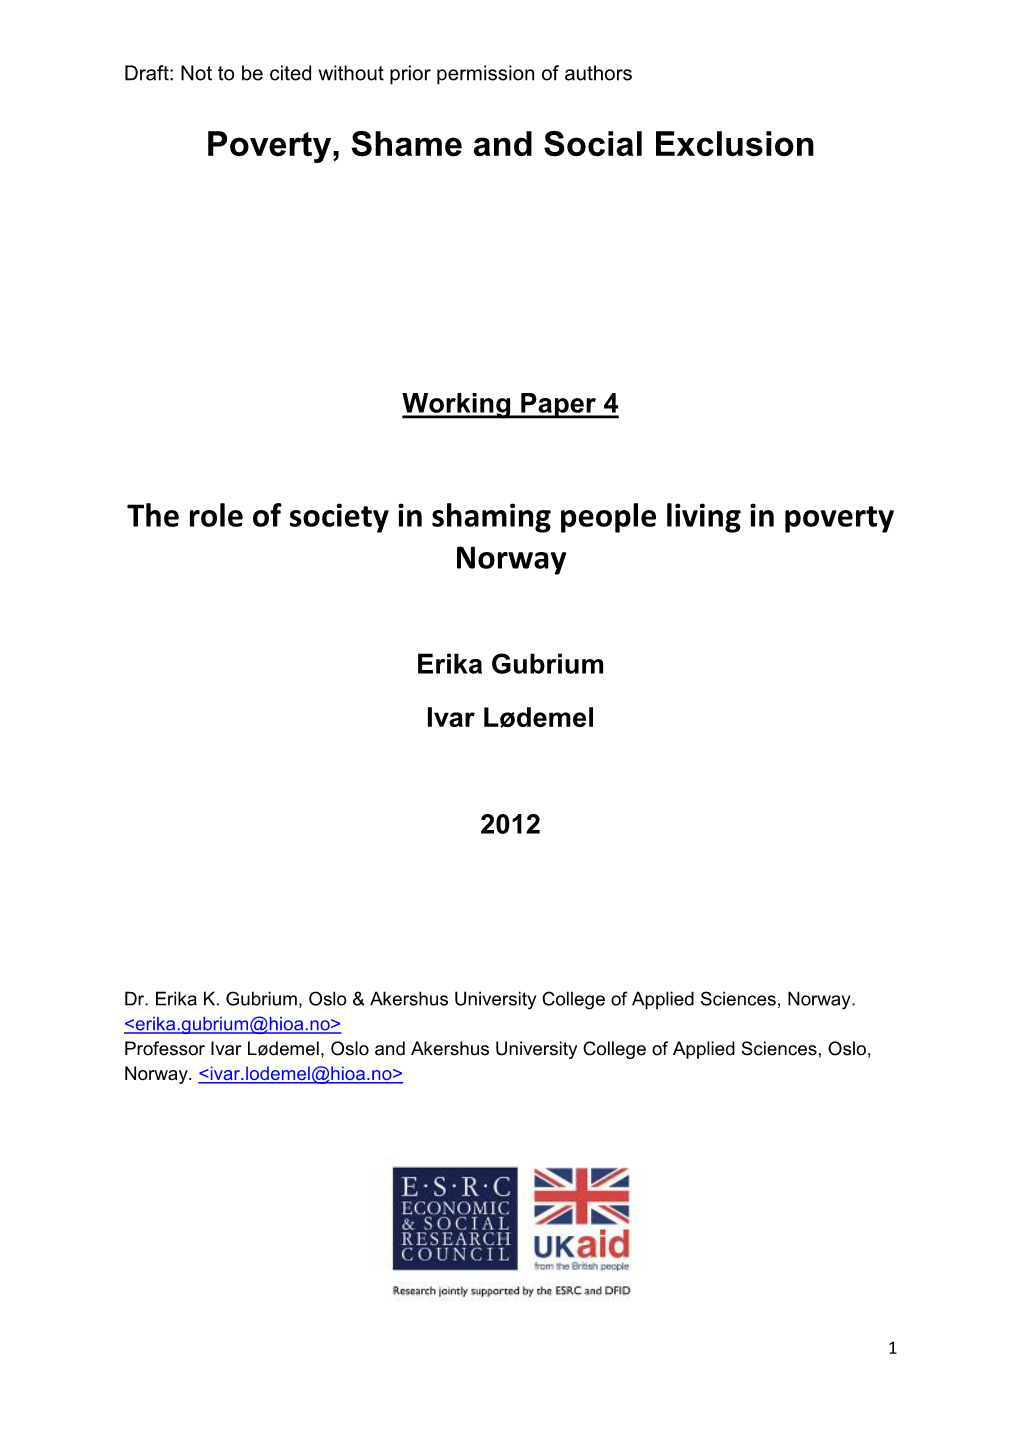 WP4 Public Perceptions of Poverty Norway